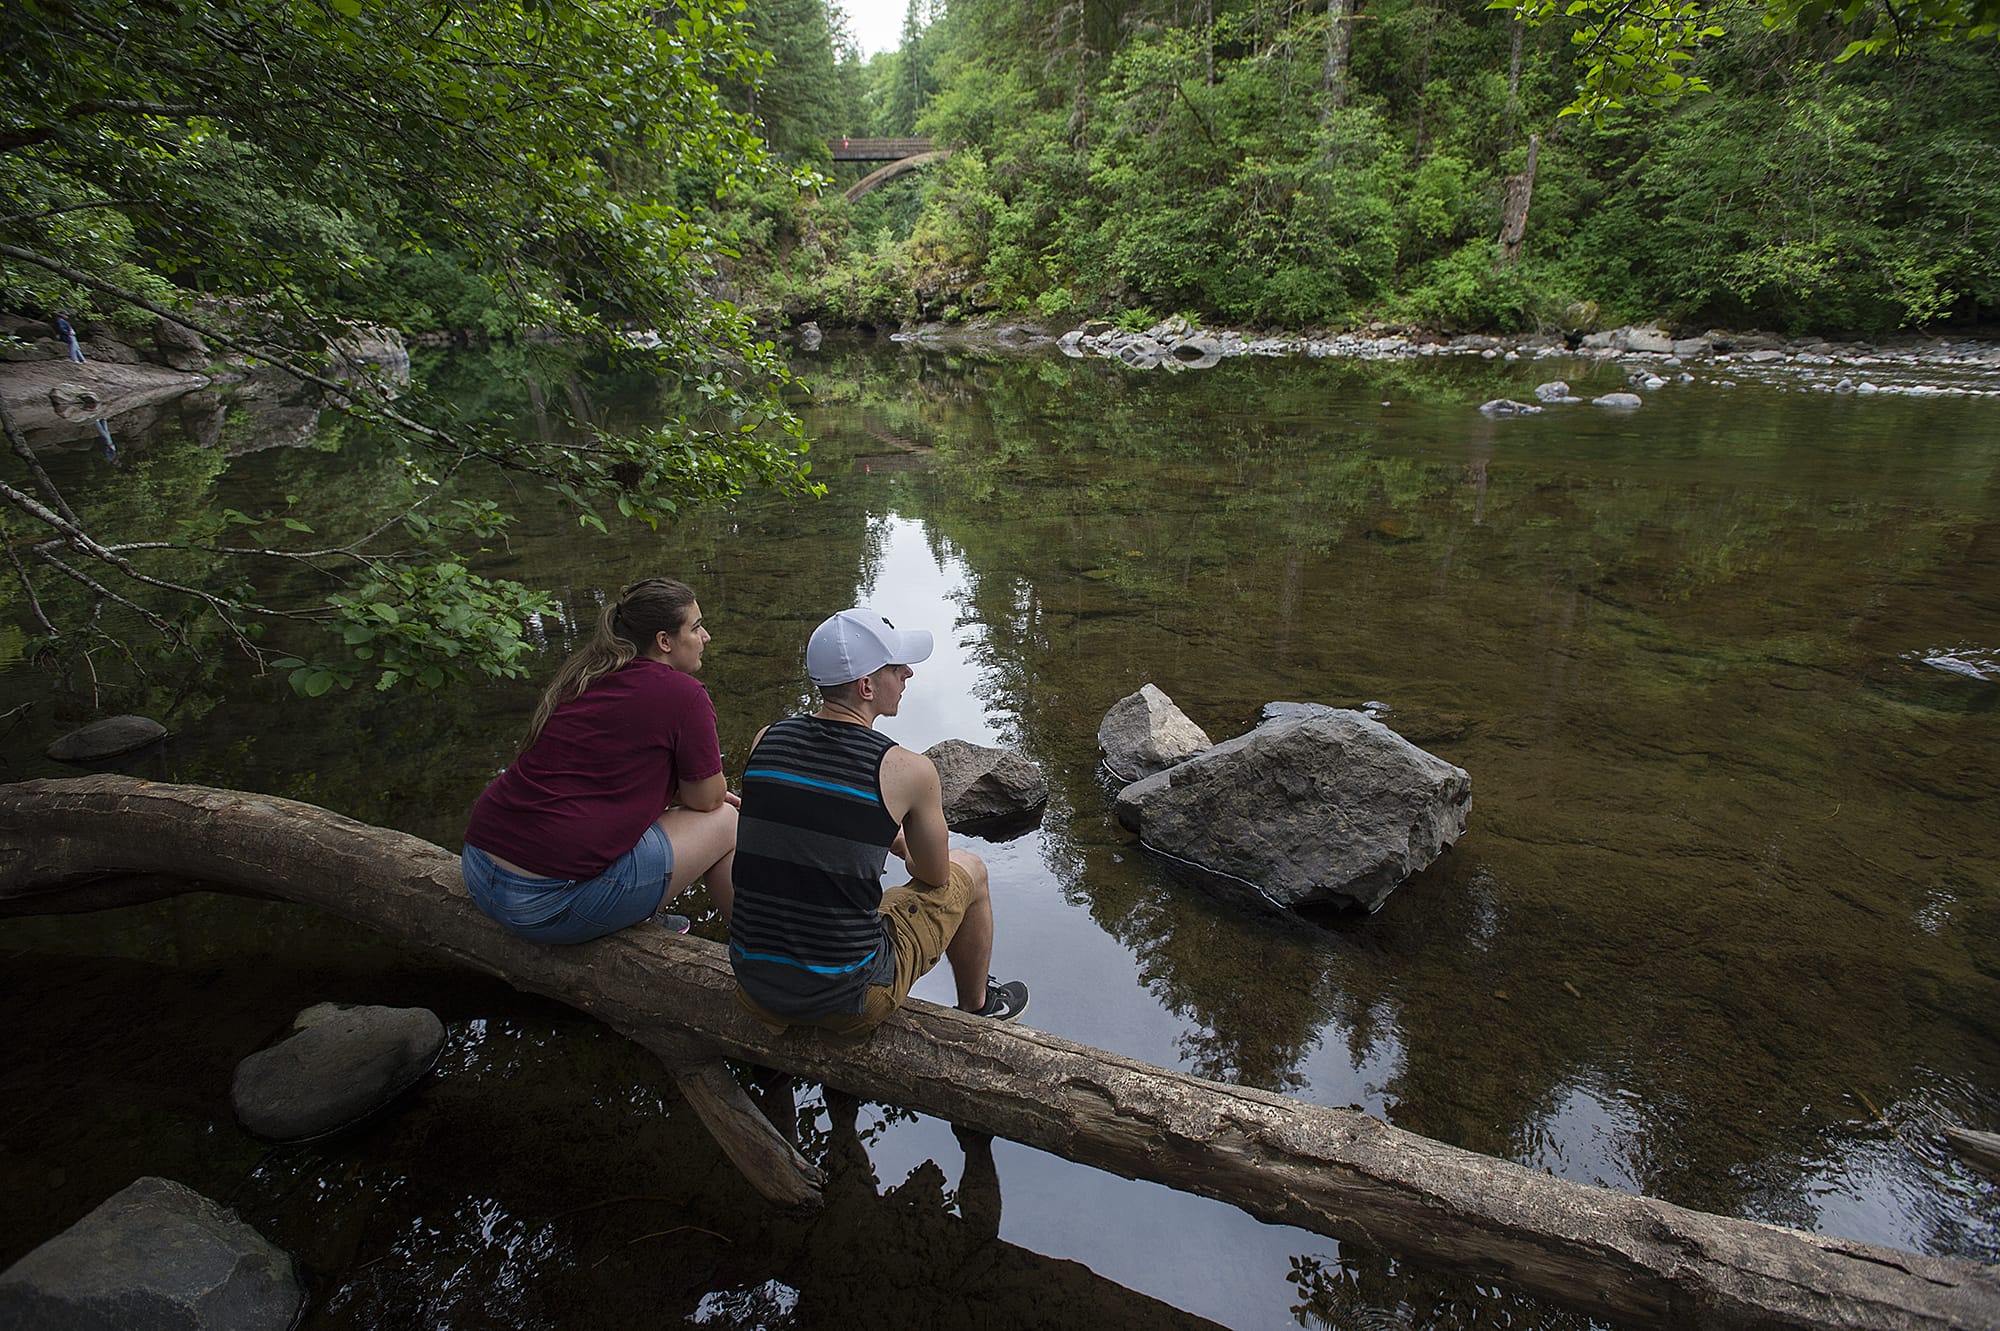 Noaa Boris, left, and Connor Guenther, both of Battle Ground, take in the view as rocks are exposed by low water levels near Moulton Falls Park on Thursday afternoon, June 21, 2018.